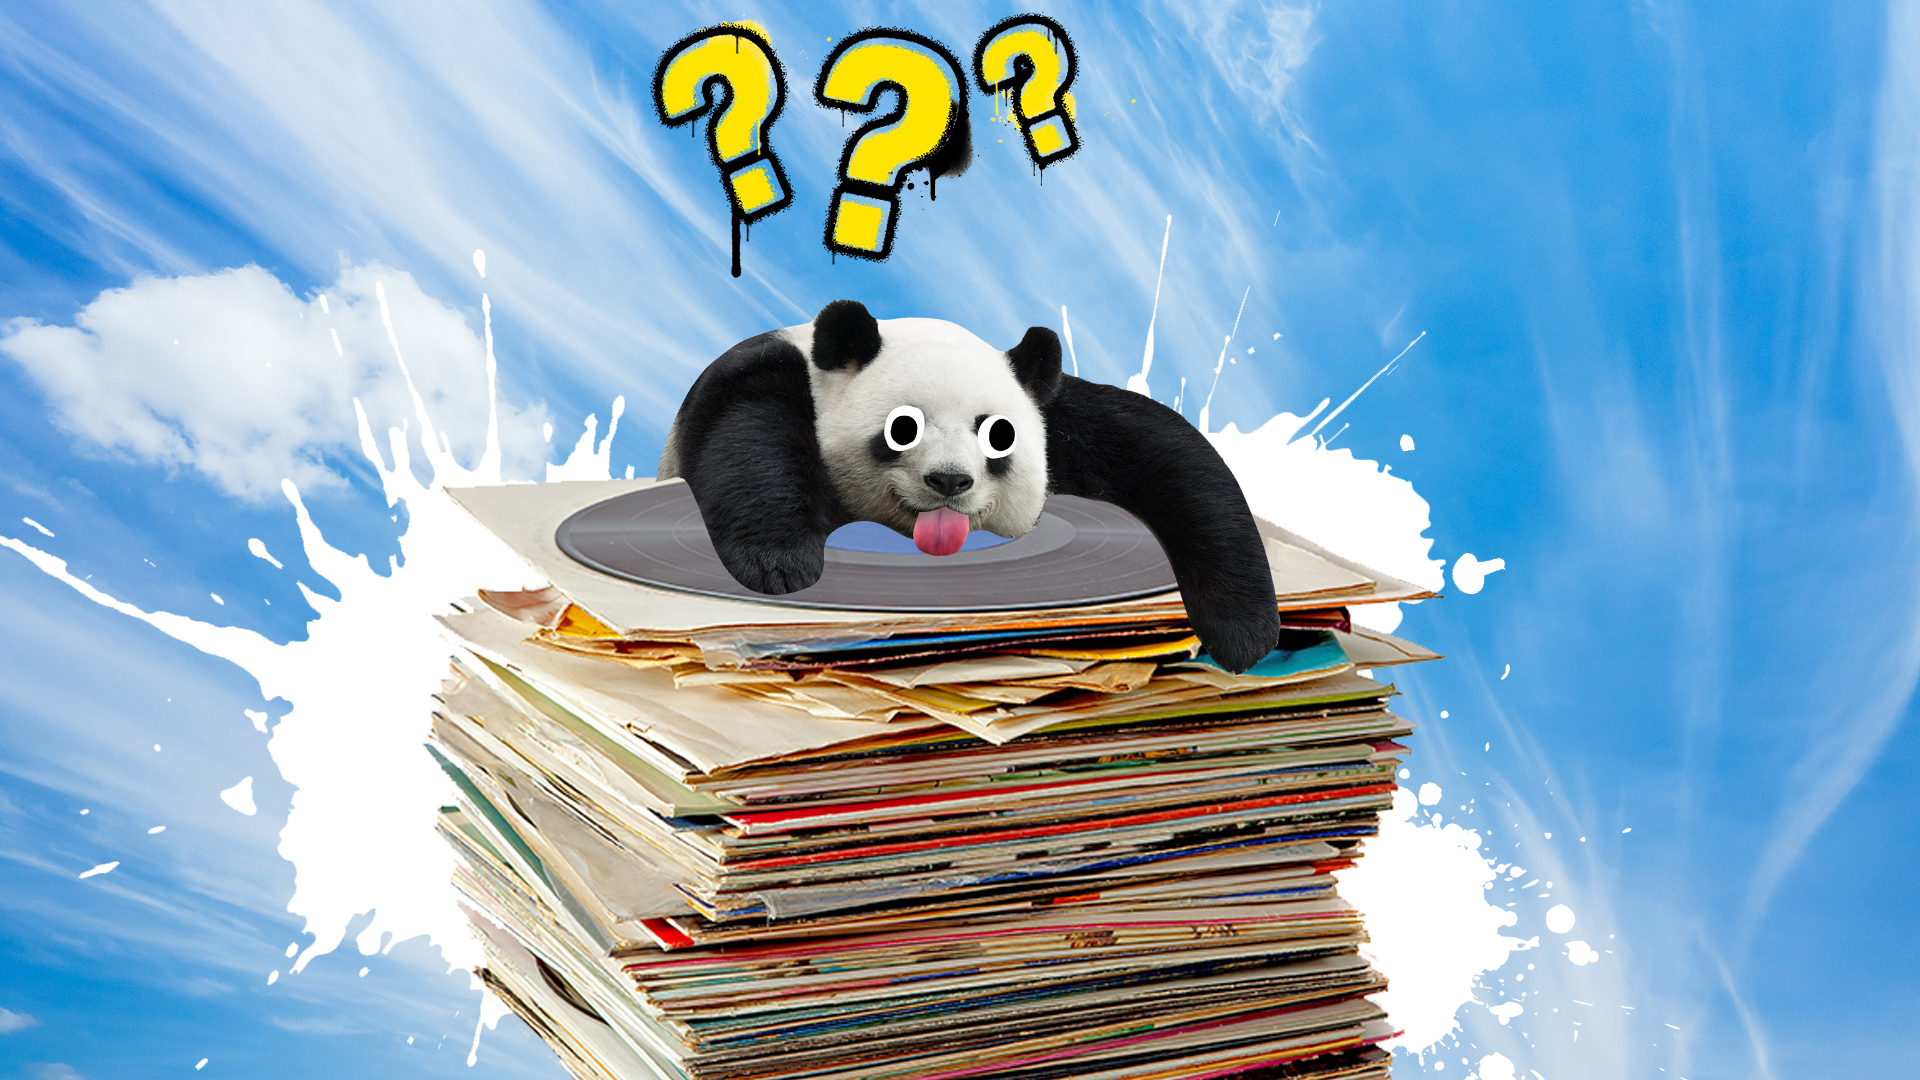 A panda on top of a pile of vinyl records